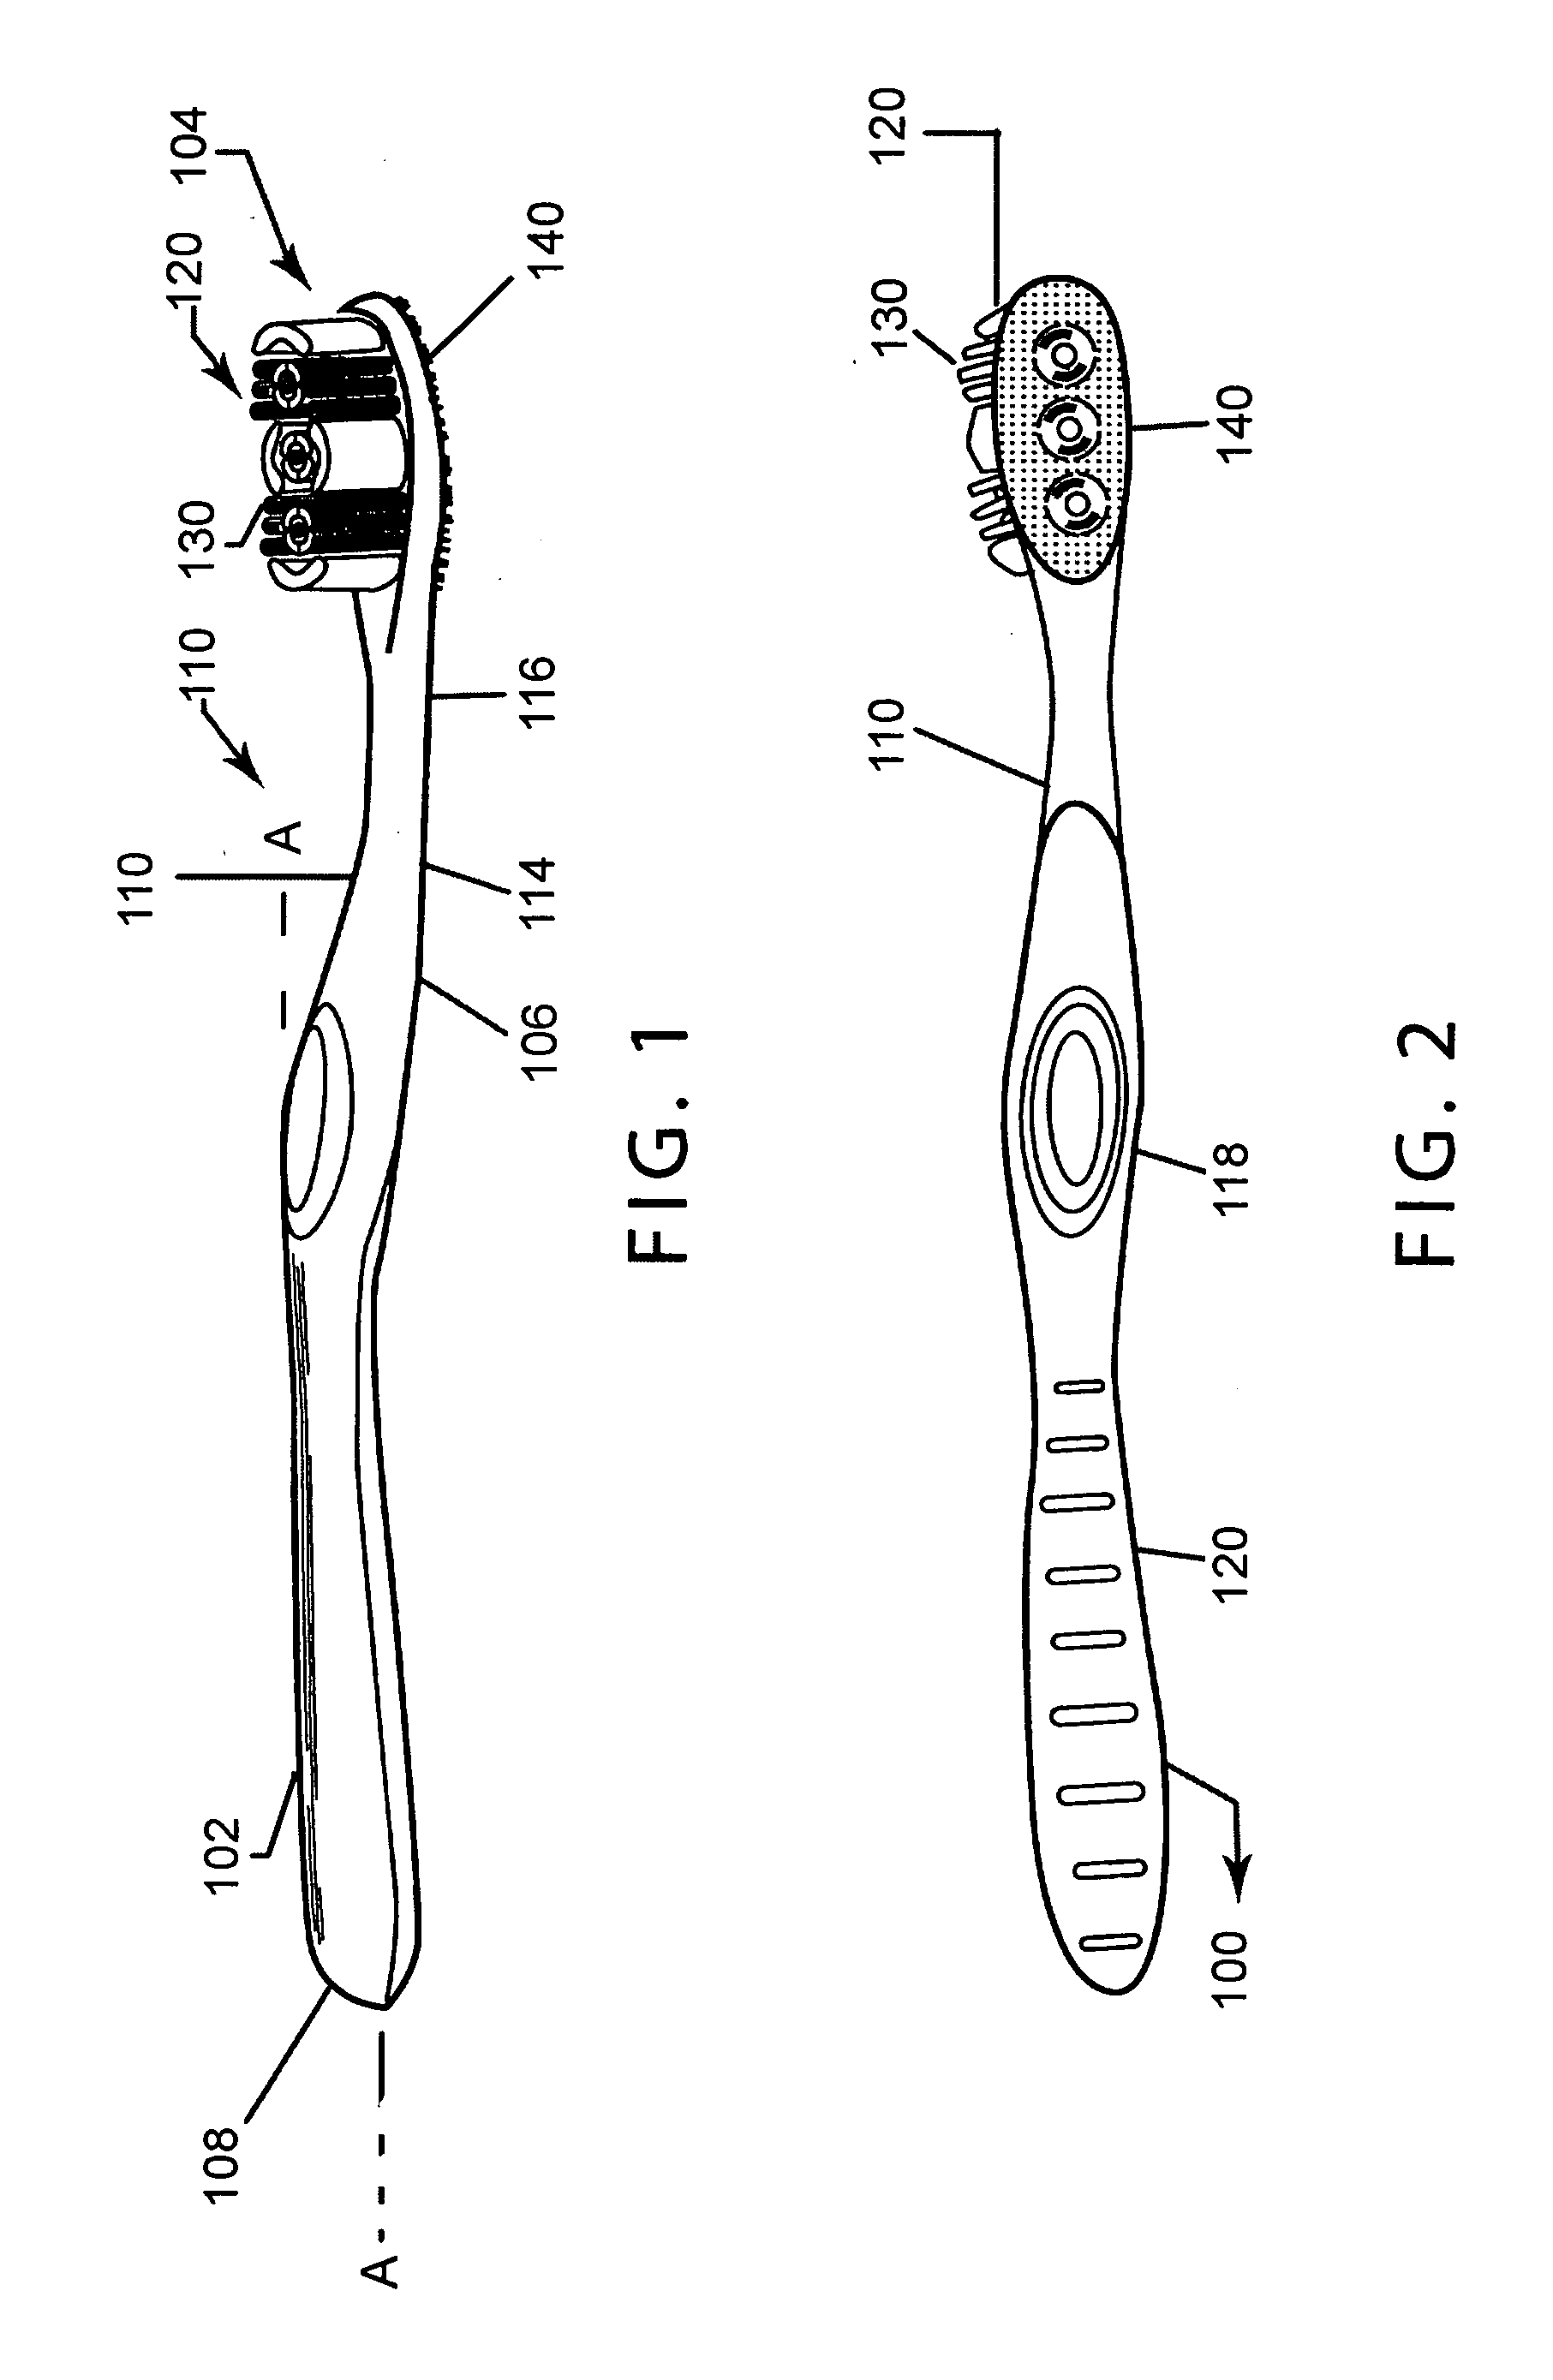 Toothbrush with tongue cleaning member